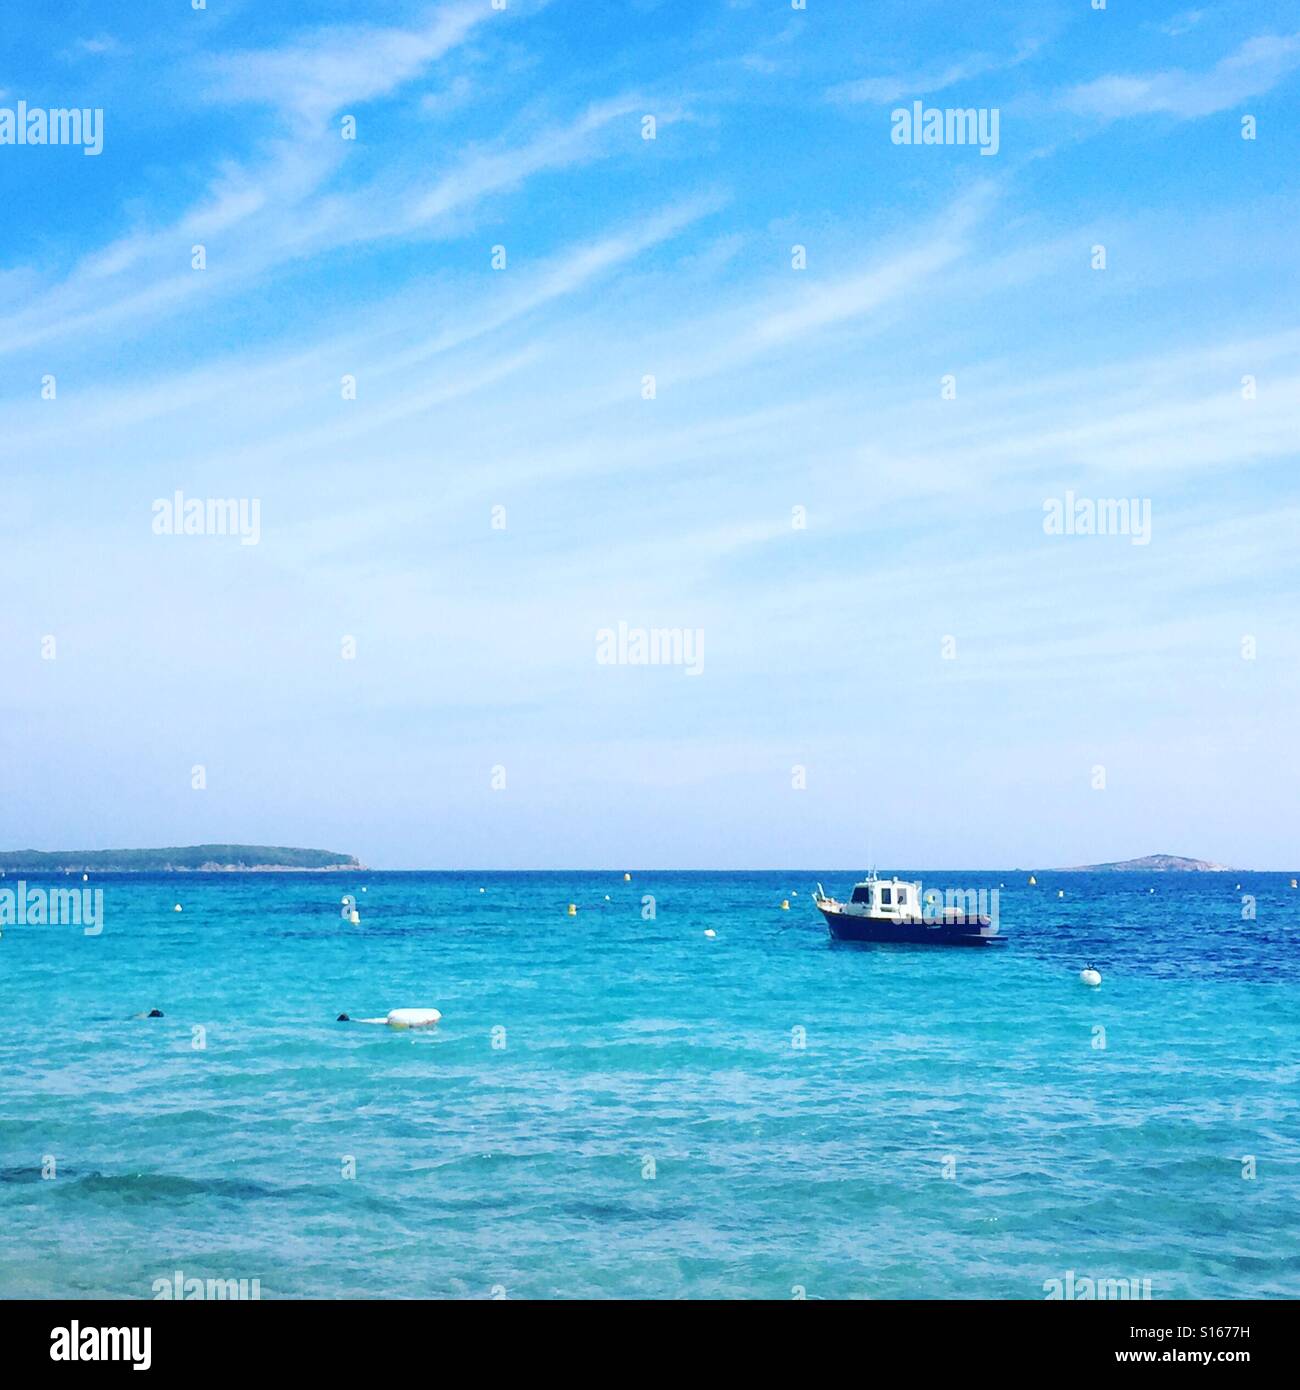 Boat floating in the bay on the clear blue sea Stock Photo